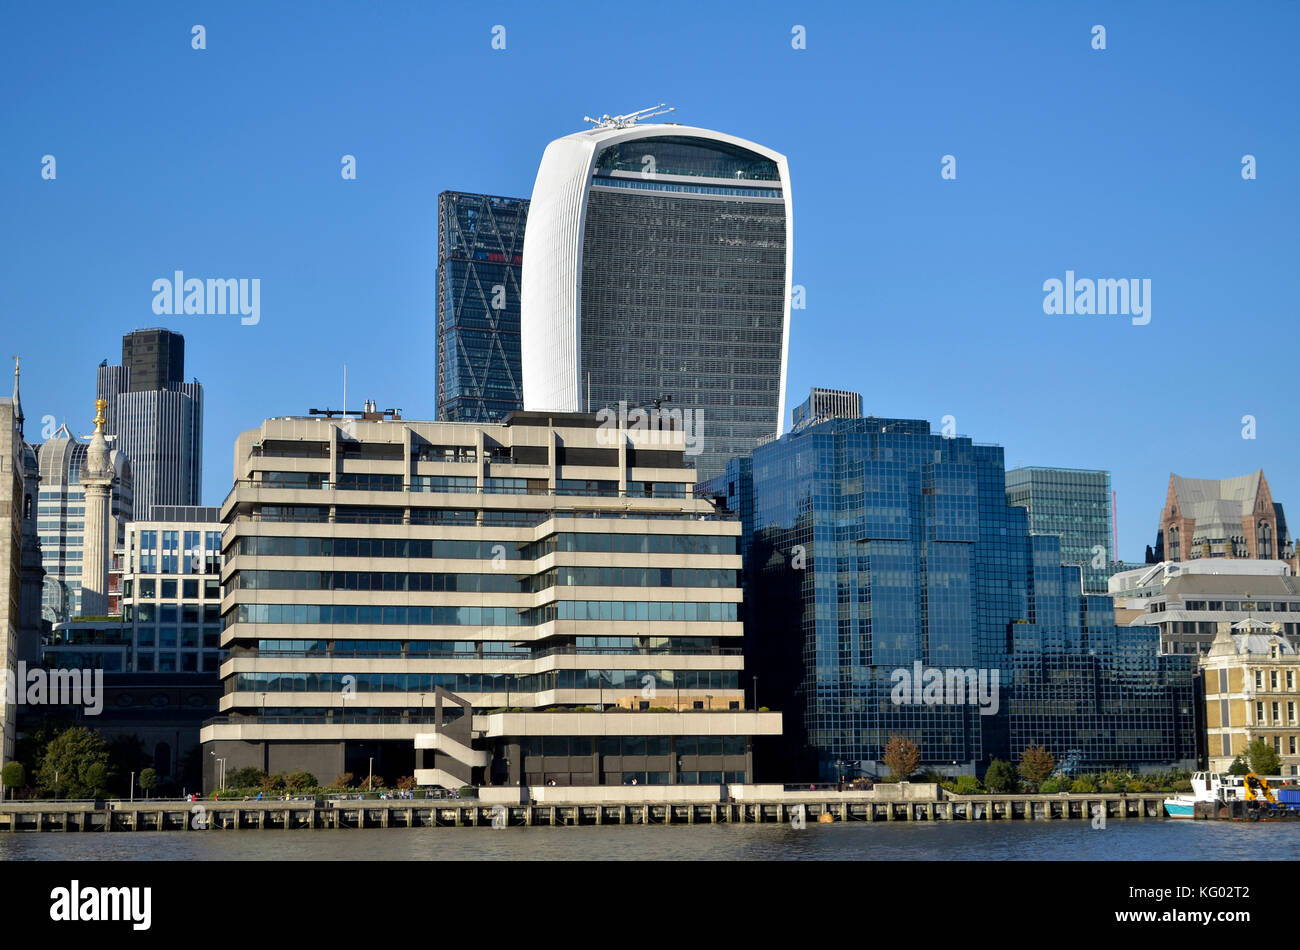 20 Fenchurch Street aka The Walkie Talkie, London, with The Leandehall Building aka The Cheese Grater behind. Northern & Shell Building to the right. Stock Photo